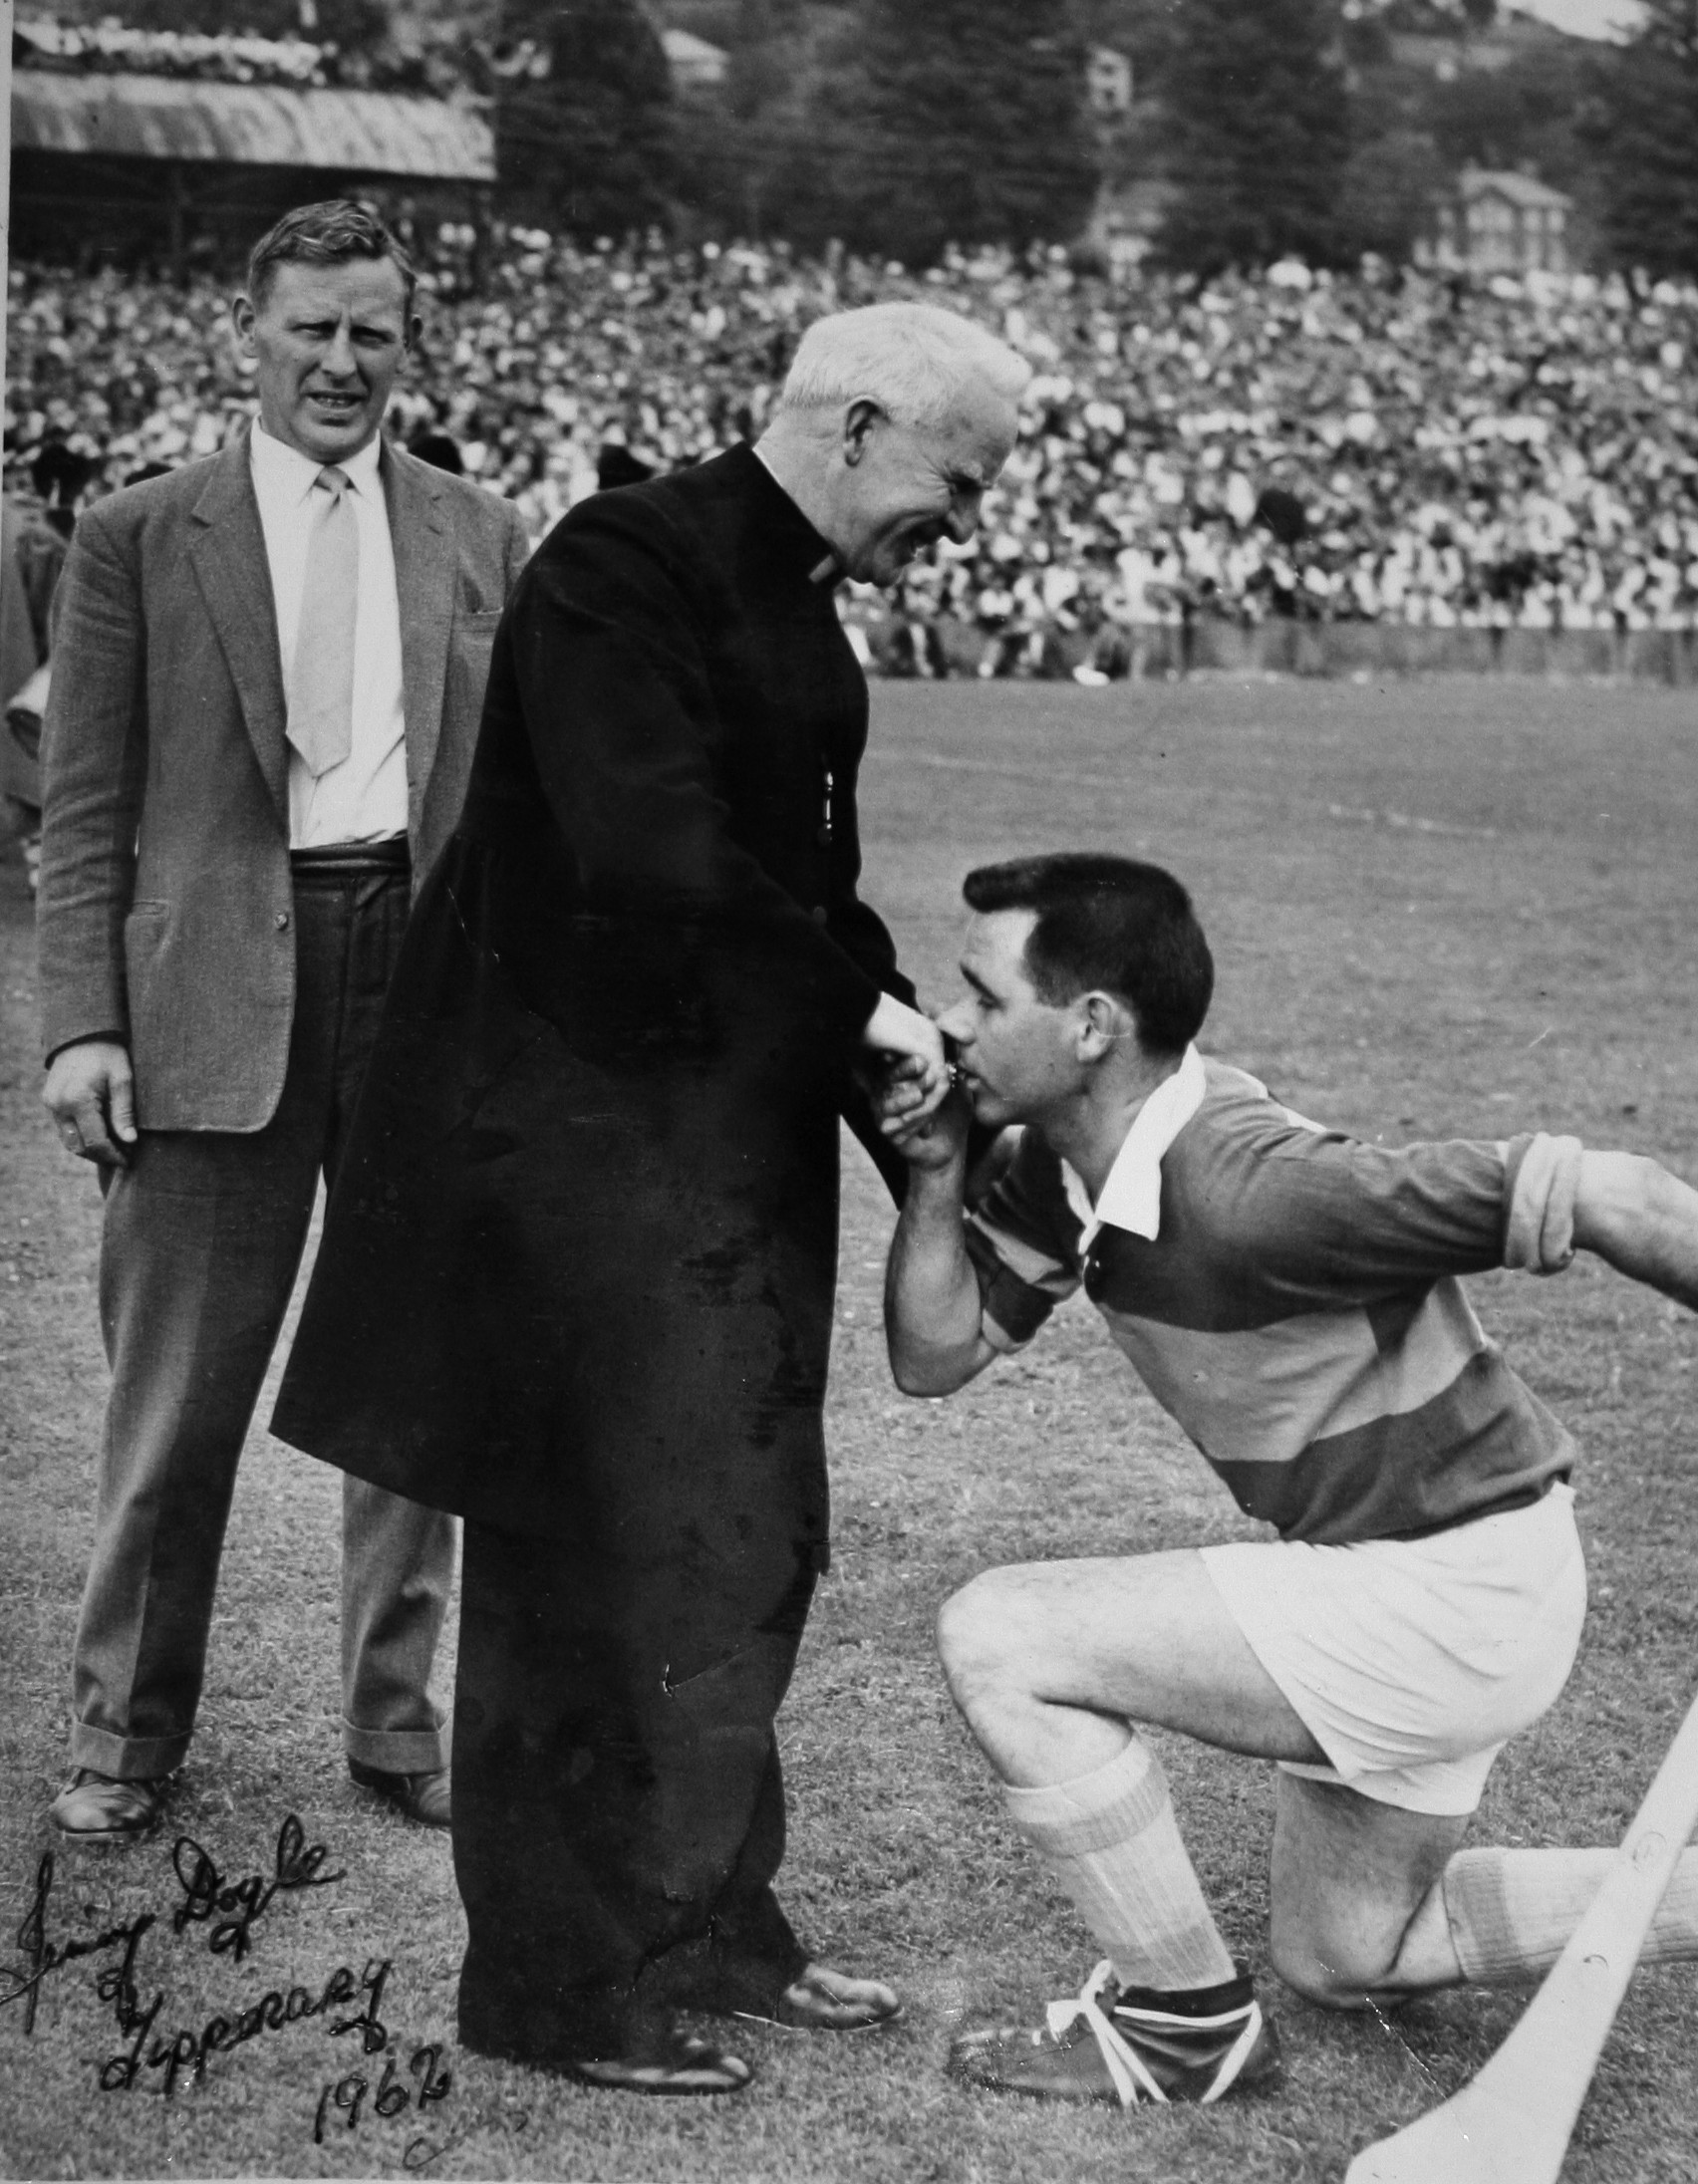 The traditional image of the team captain kissing the bishop's ring before the start of the match. This image shows Bishop Lucy and Jimmy Doyle at the 1962 Munster Senior Hurling Final.